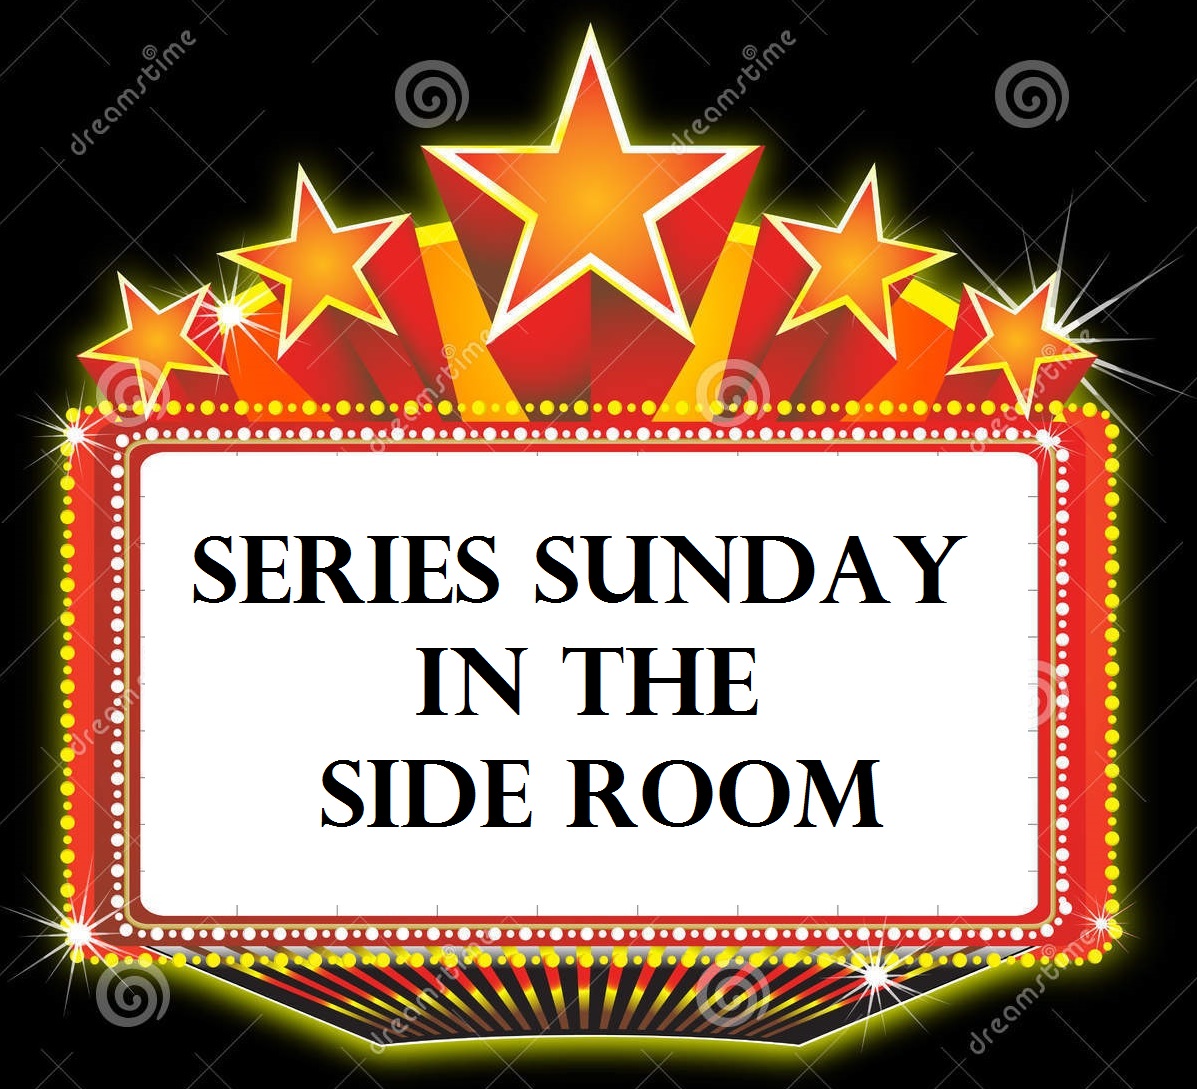 14 Aug 2016: Series Sunday in the Side Room